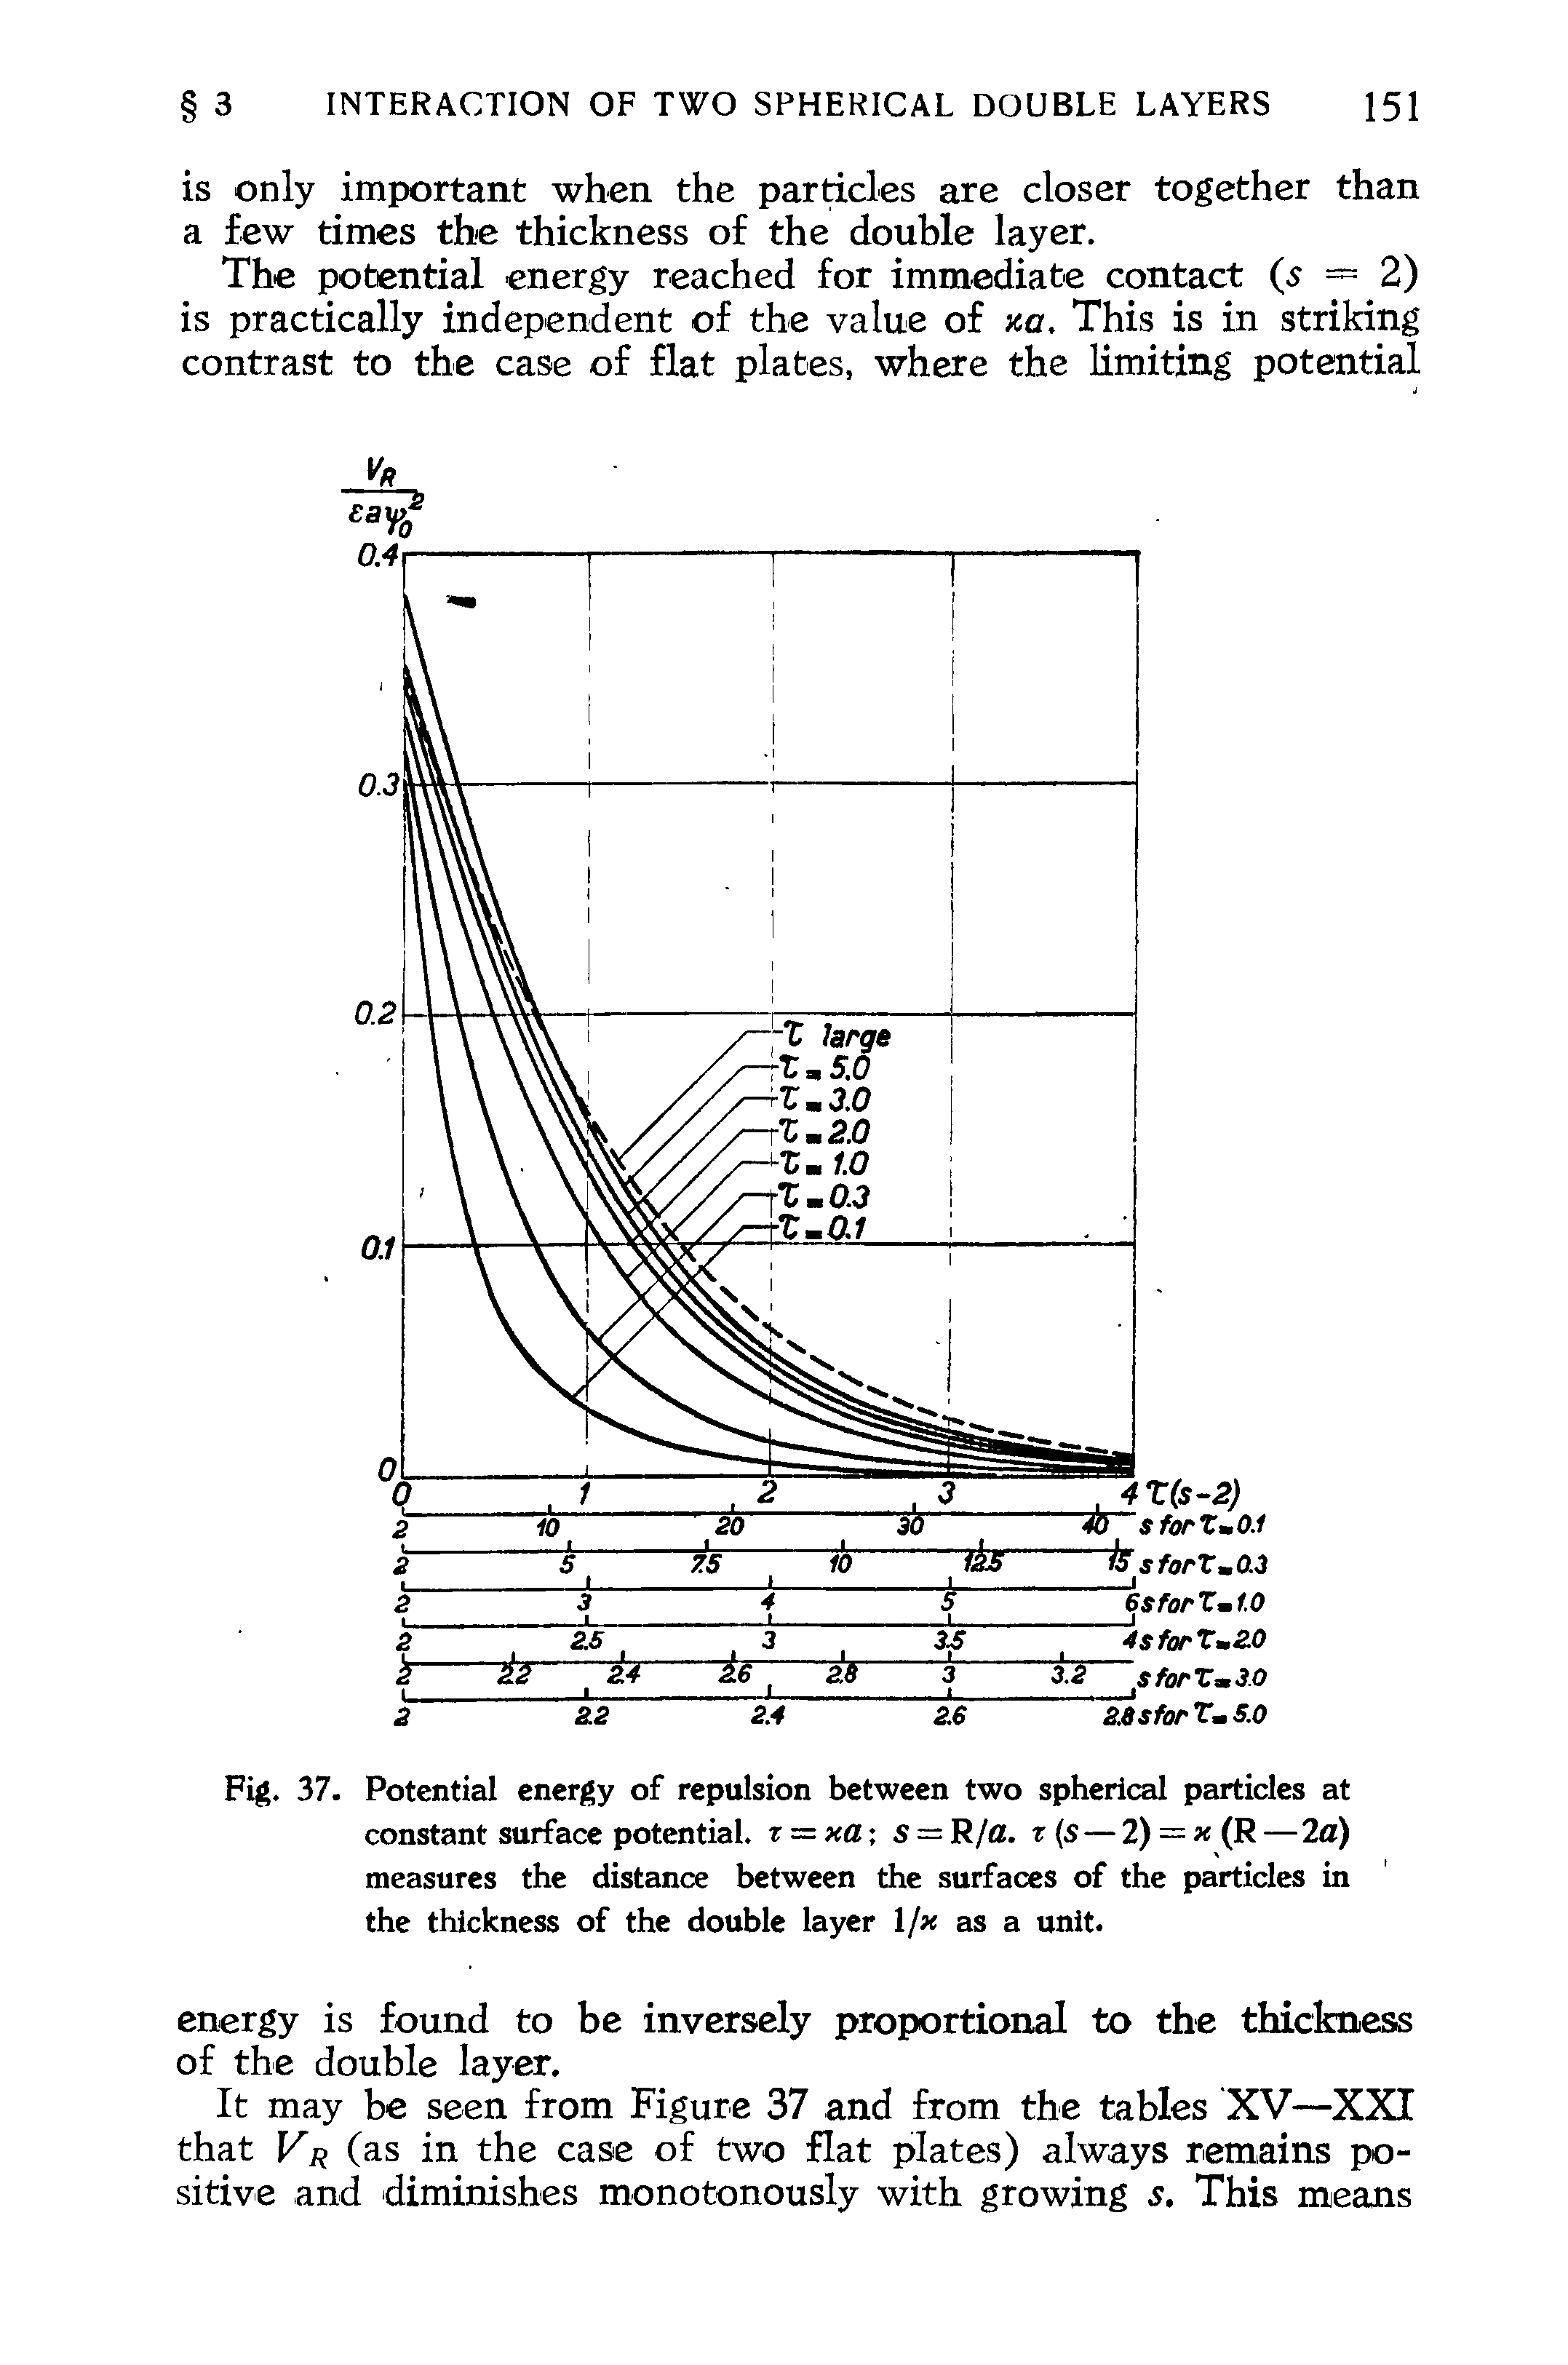 Fig. 37. Potential energy of repulsion between two spherical particles at constant surface potential. t — xa% s R/fl. r (5—2) = x (R —2fl) measures the distance between the surfaces of the particles in the thickness of the double layer l/ as a unit.